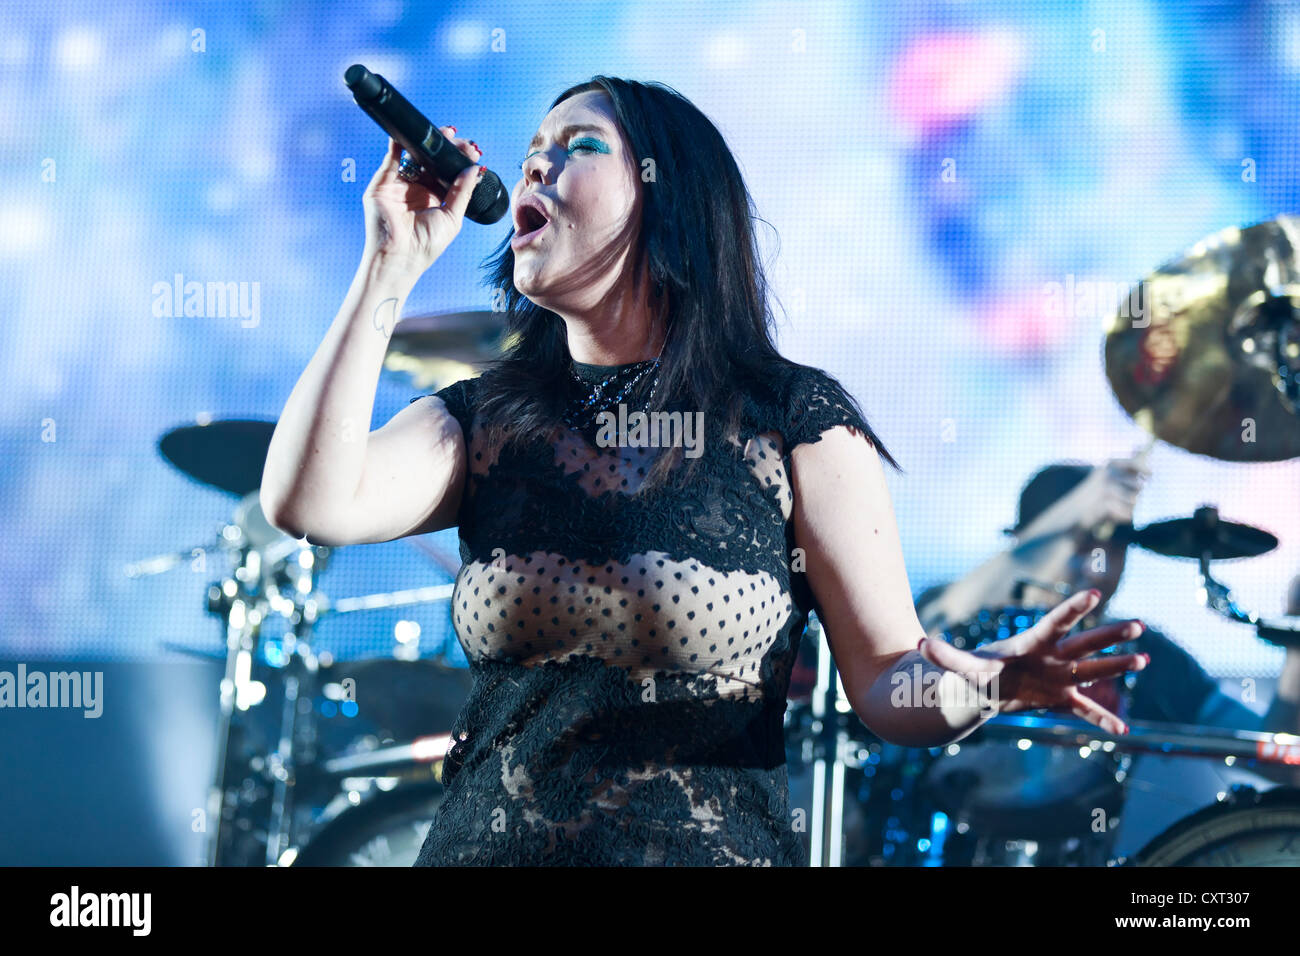 Anette Olzon, singer of the Finnish symphonic metal band Nightwish, performing live at the Hallenstadion concert hall, Zurich Stock Photo